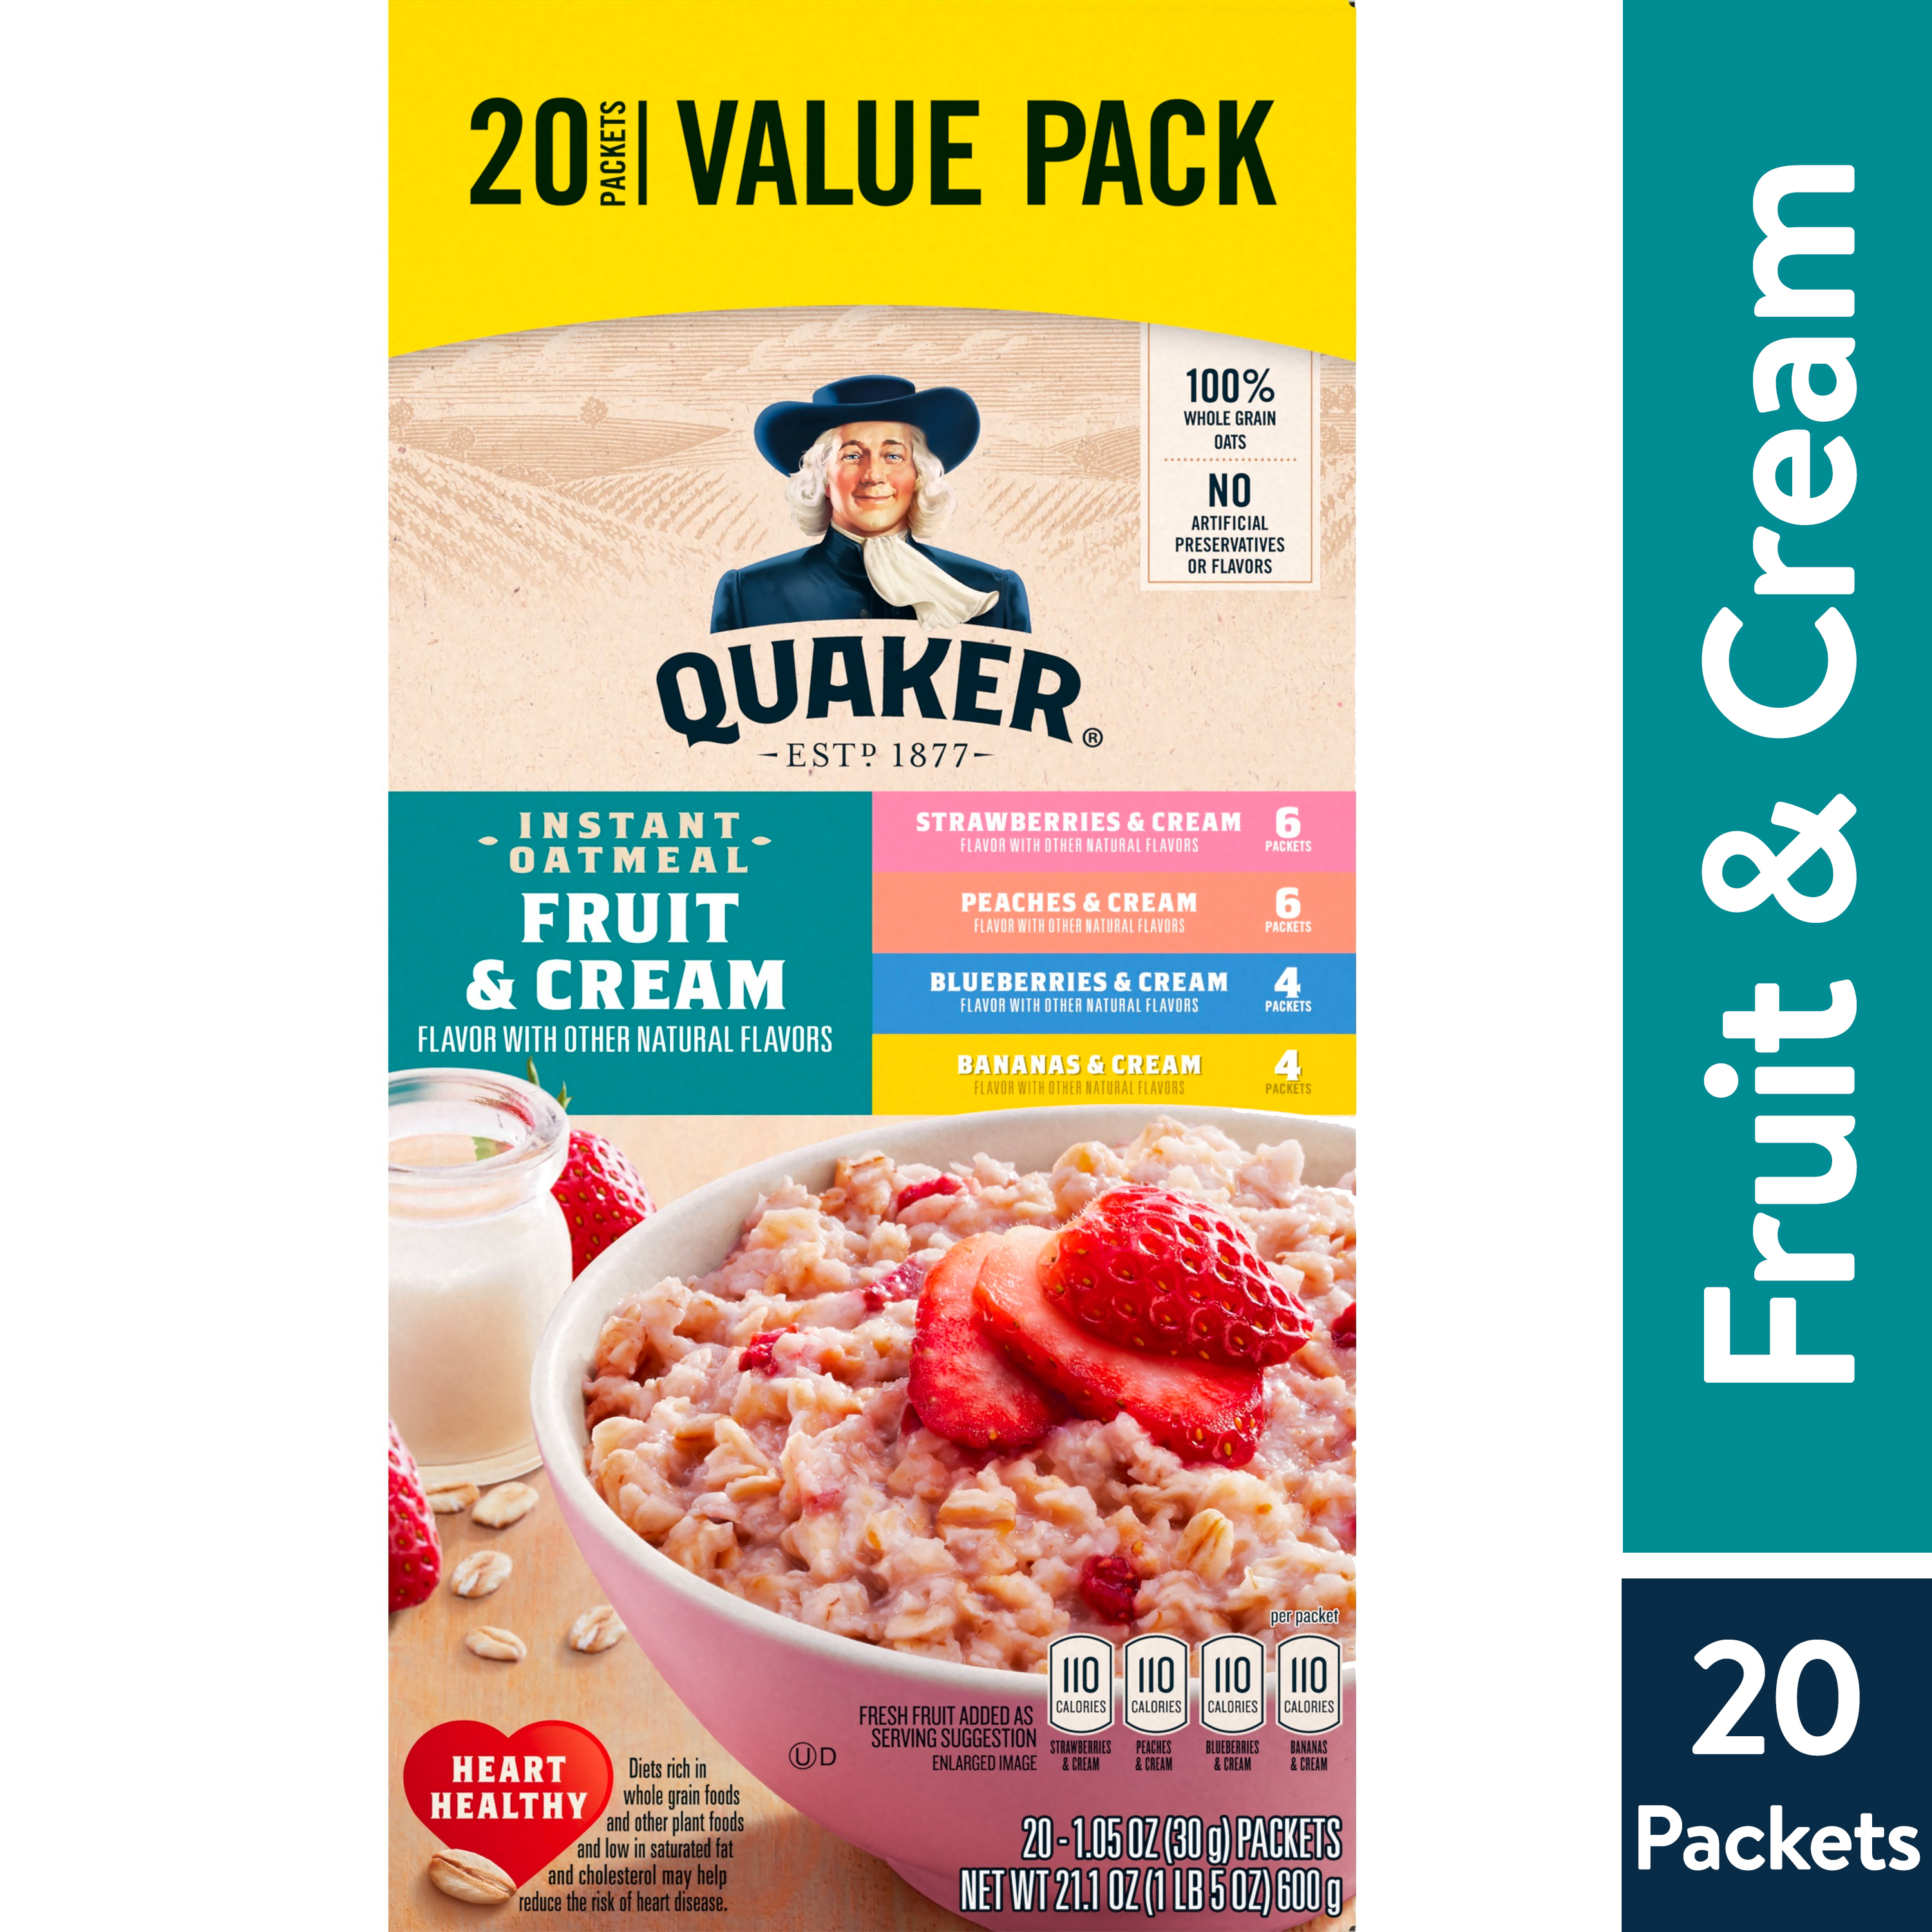 Quaker Instant Oatmeal, Fruit & Cream Variety Pack, Quick Cook Oatmeal, 1.1 oz Packets, 20 Pack - image 1 of 12